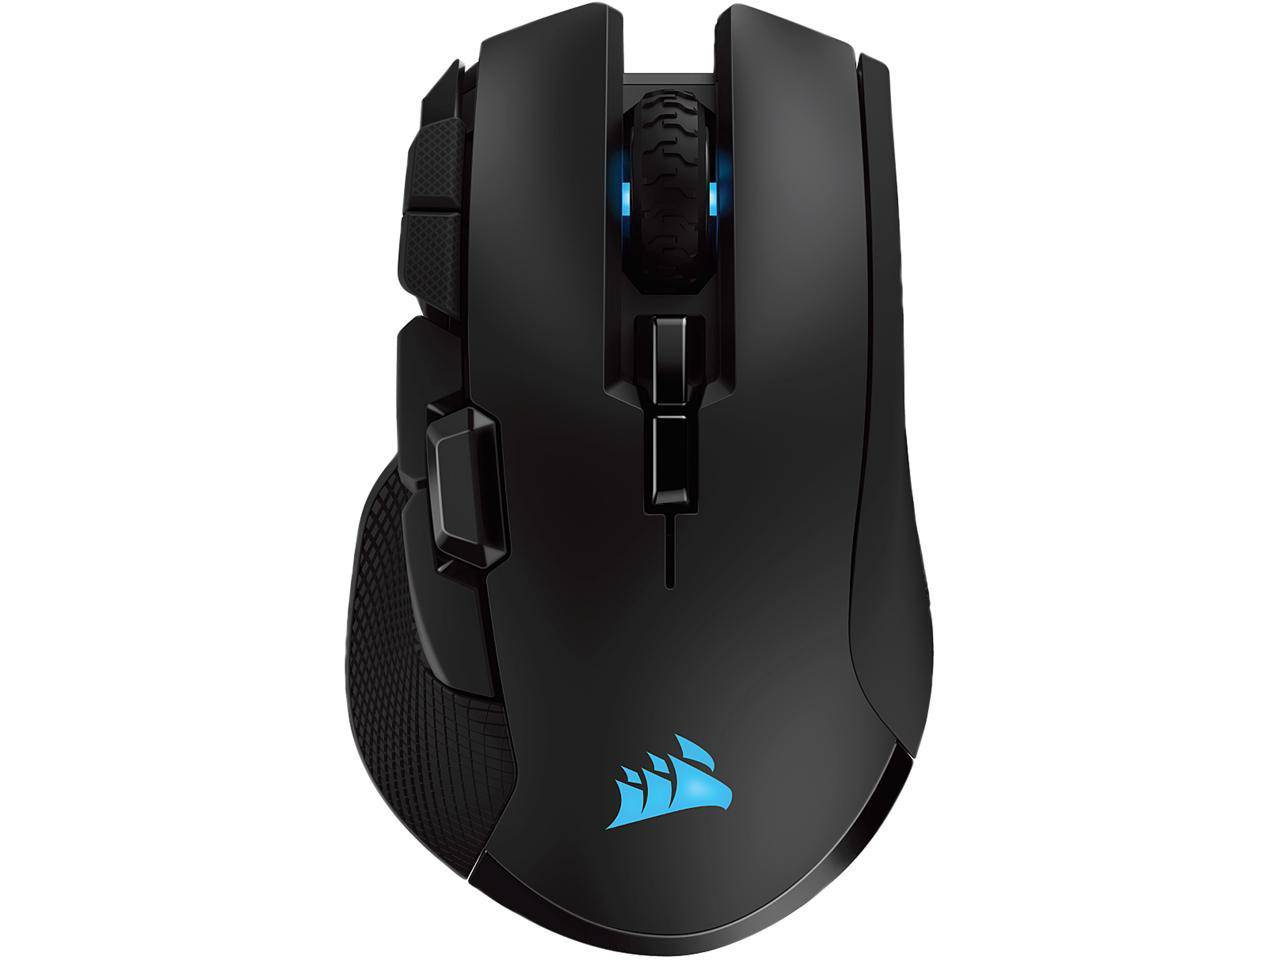 Corsair Irconclaw RGB Wireless Gaming Mouse